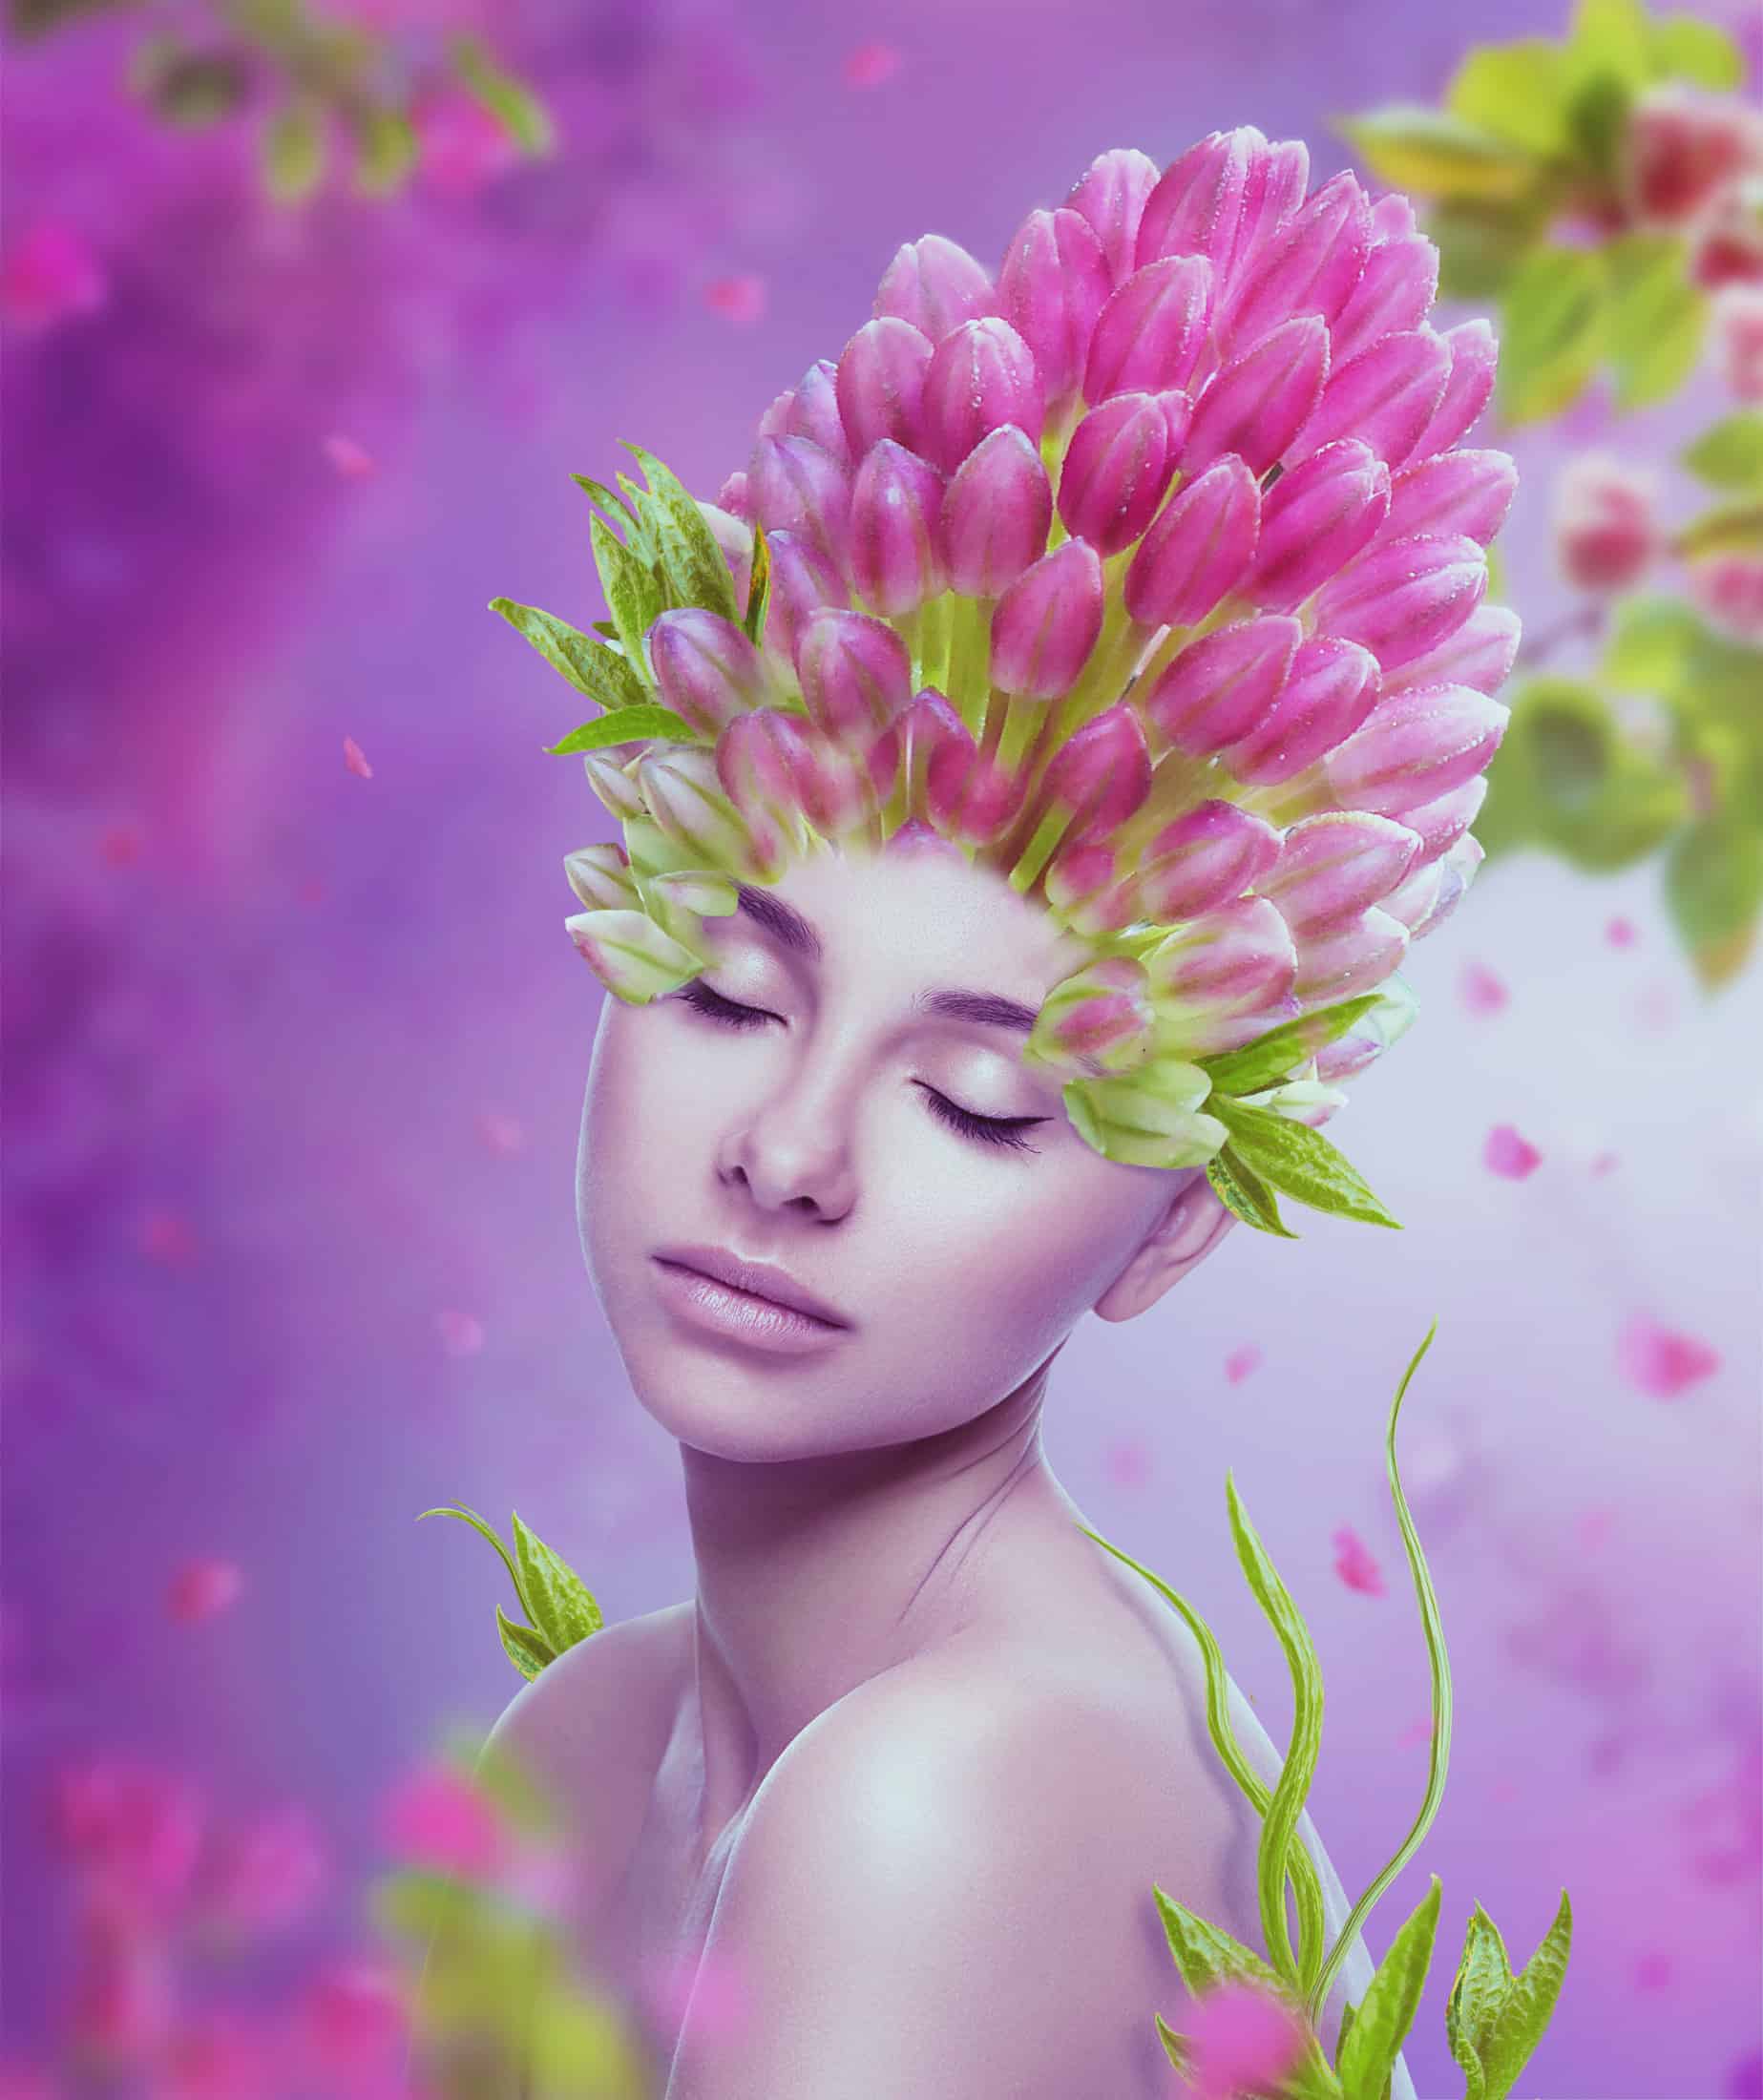 How to Create a Flower Portrait Photo Manipulation With Adobe Photoshop